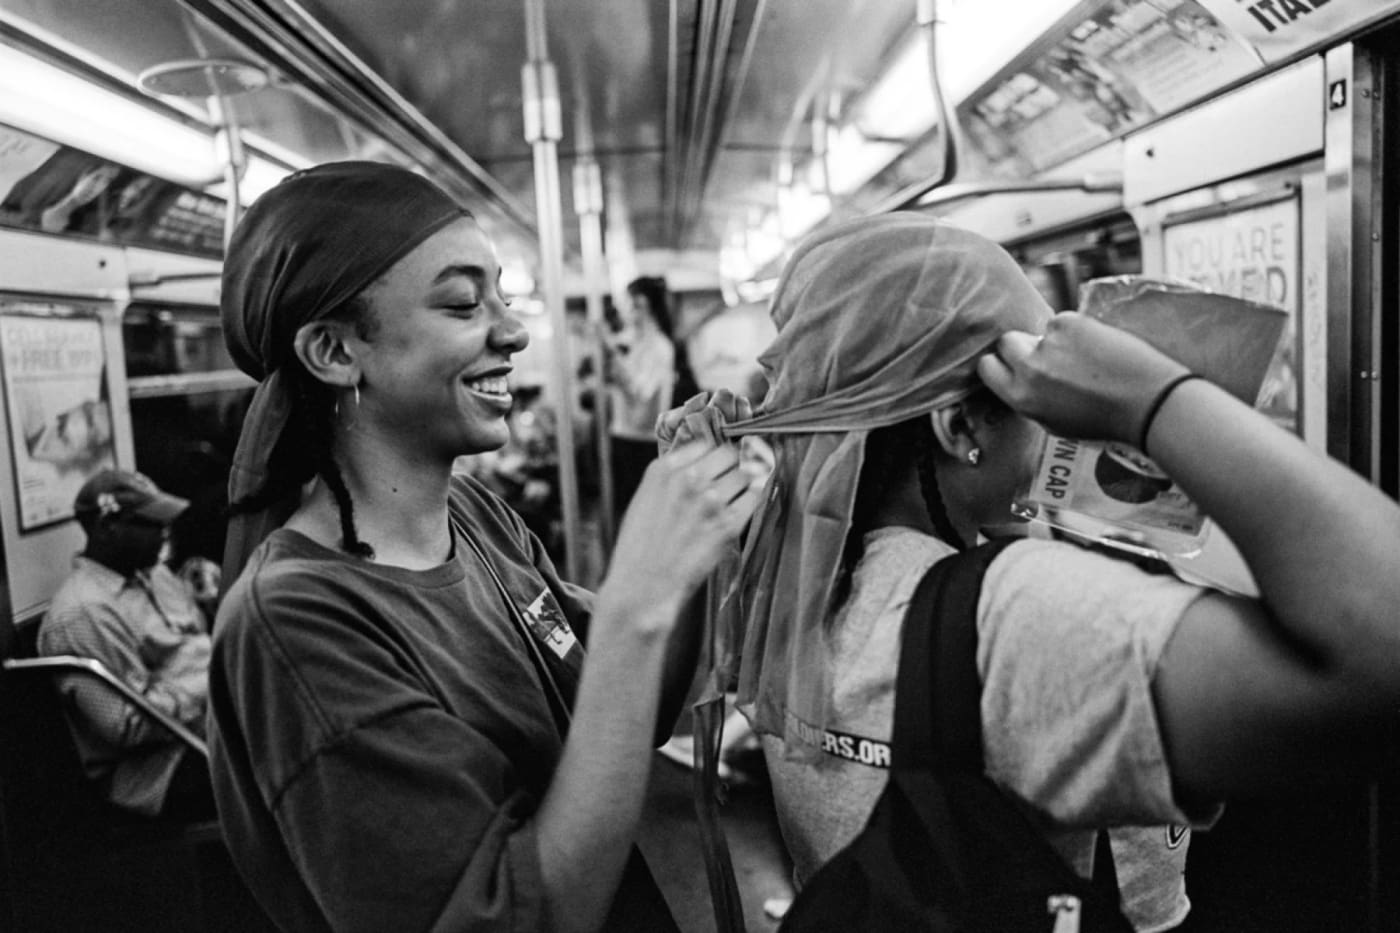 Black and white photograph showing two young women laughing and smiling on the train, one helps the other with their head scarf.